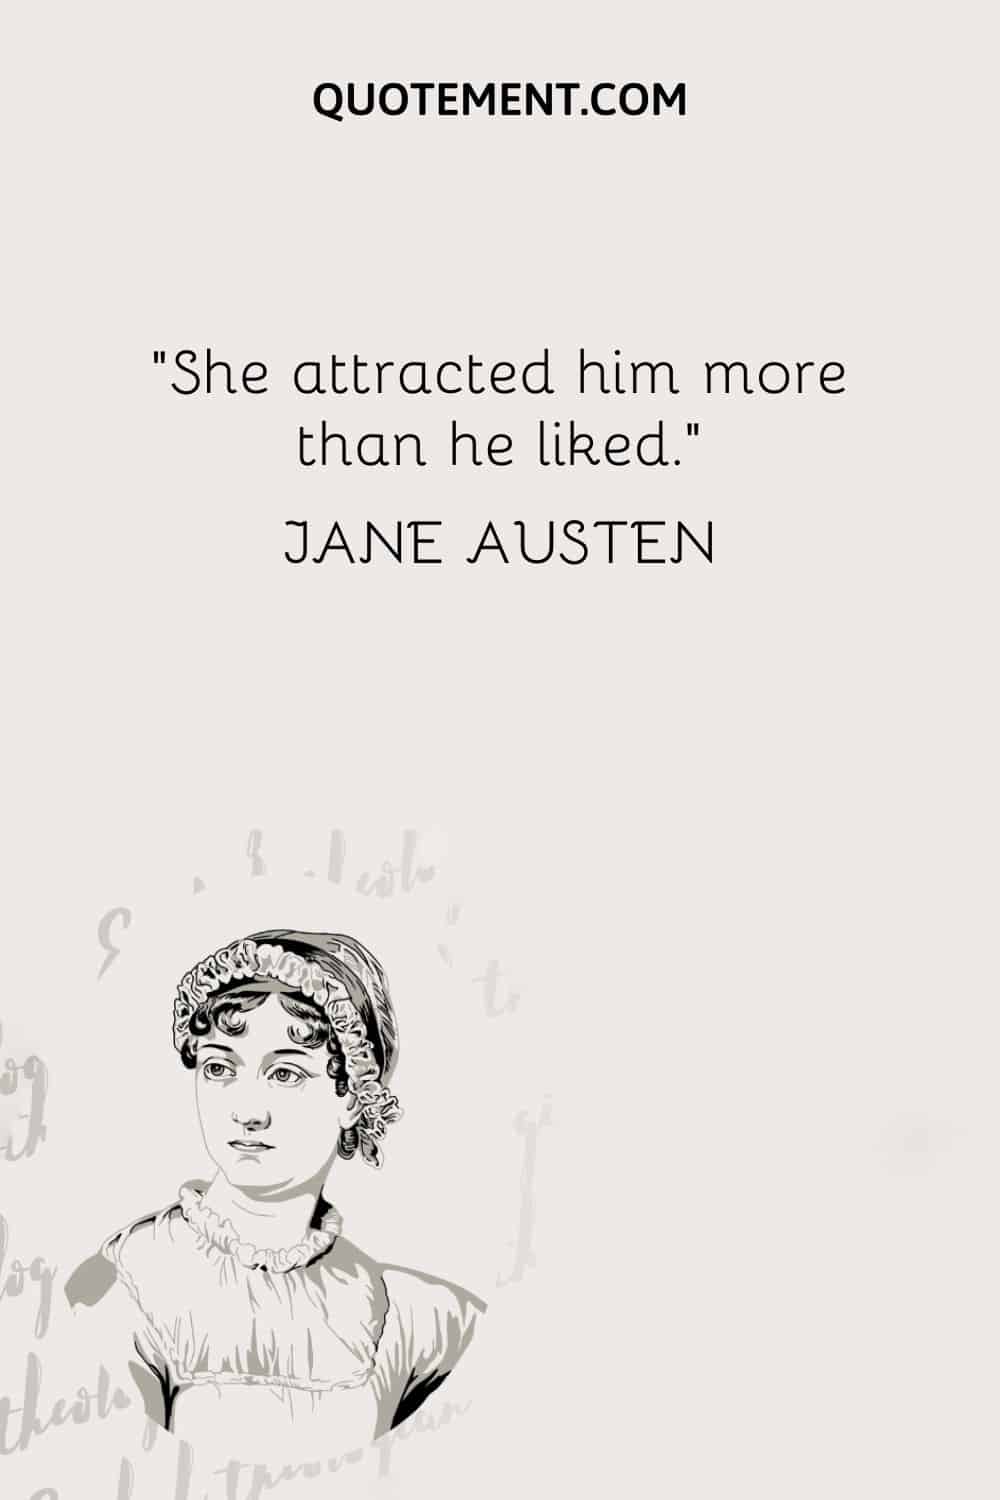 She attracted him more than he liked. — Jane Austen